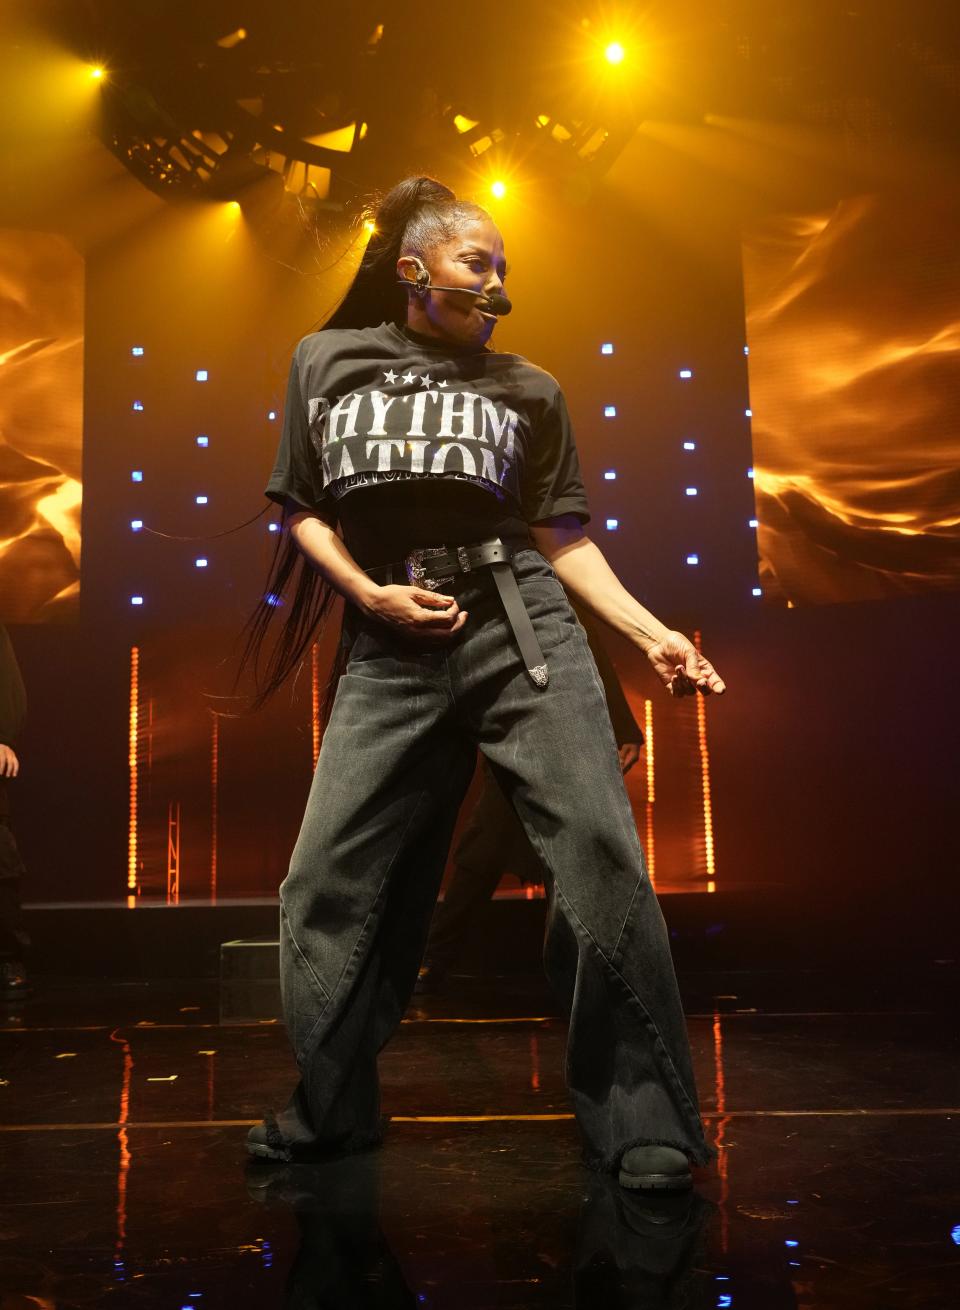 Janet Jackson gets her "Rhythm Nation" on in the final act of her Together Again tour, which kicked off April 14, 2023, in Hollywood, Florida.